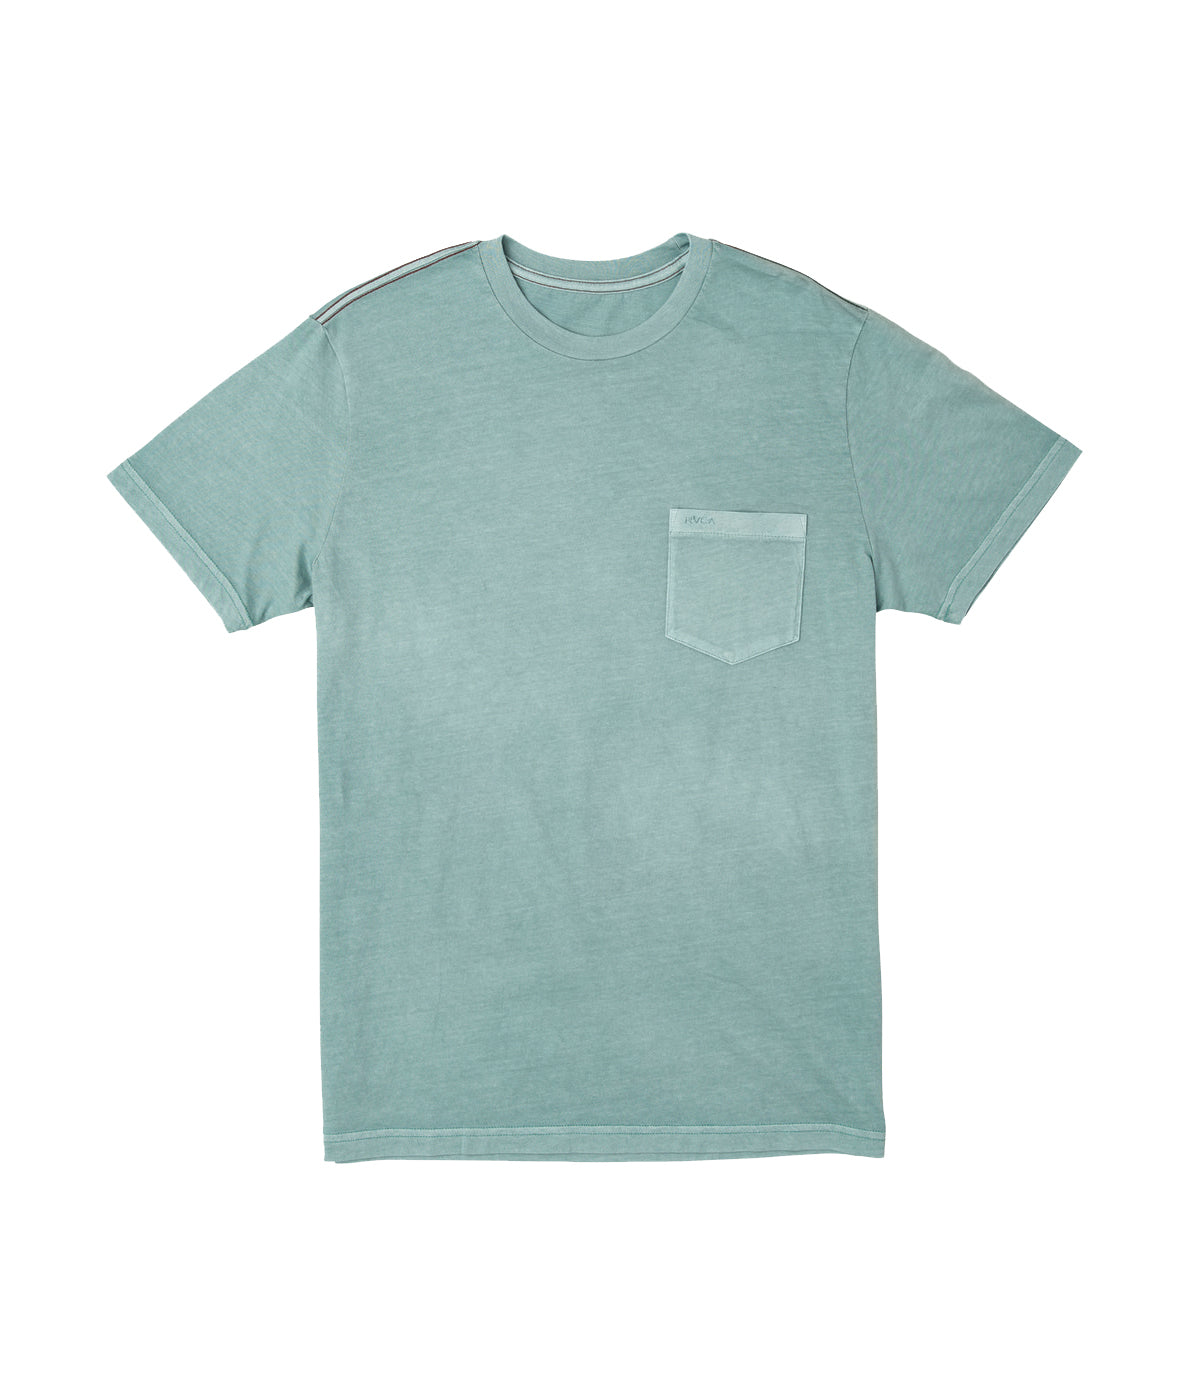 RVCA PTC 2 PIGMENT TEES SGN-Seagreen S